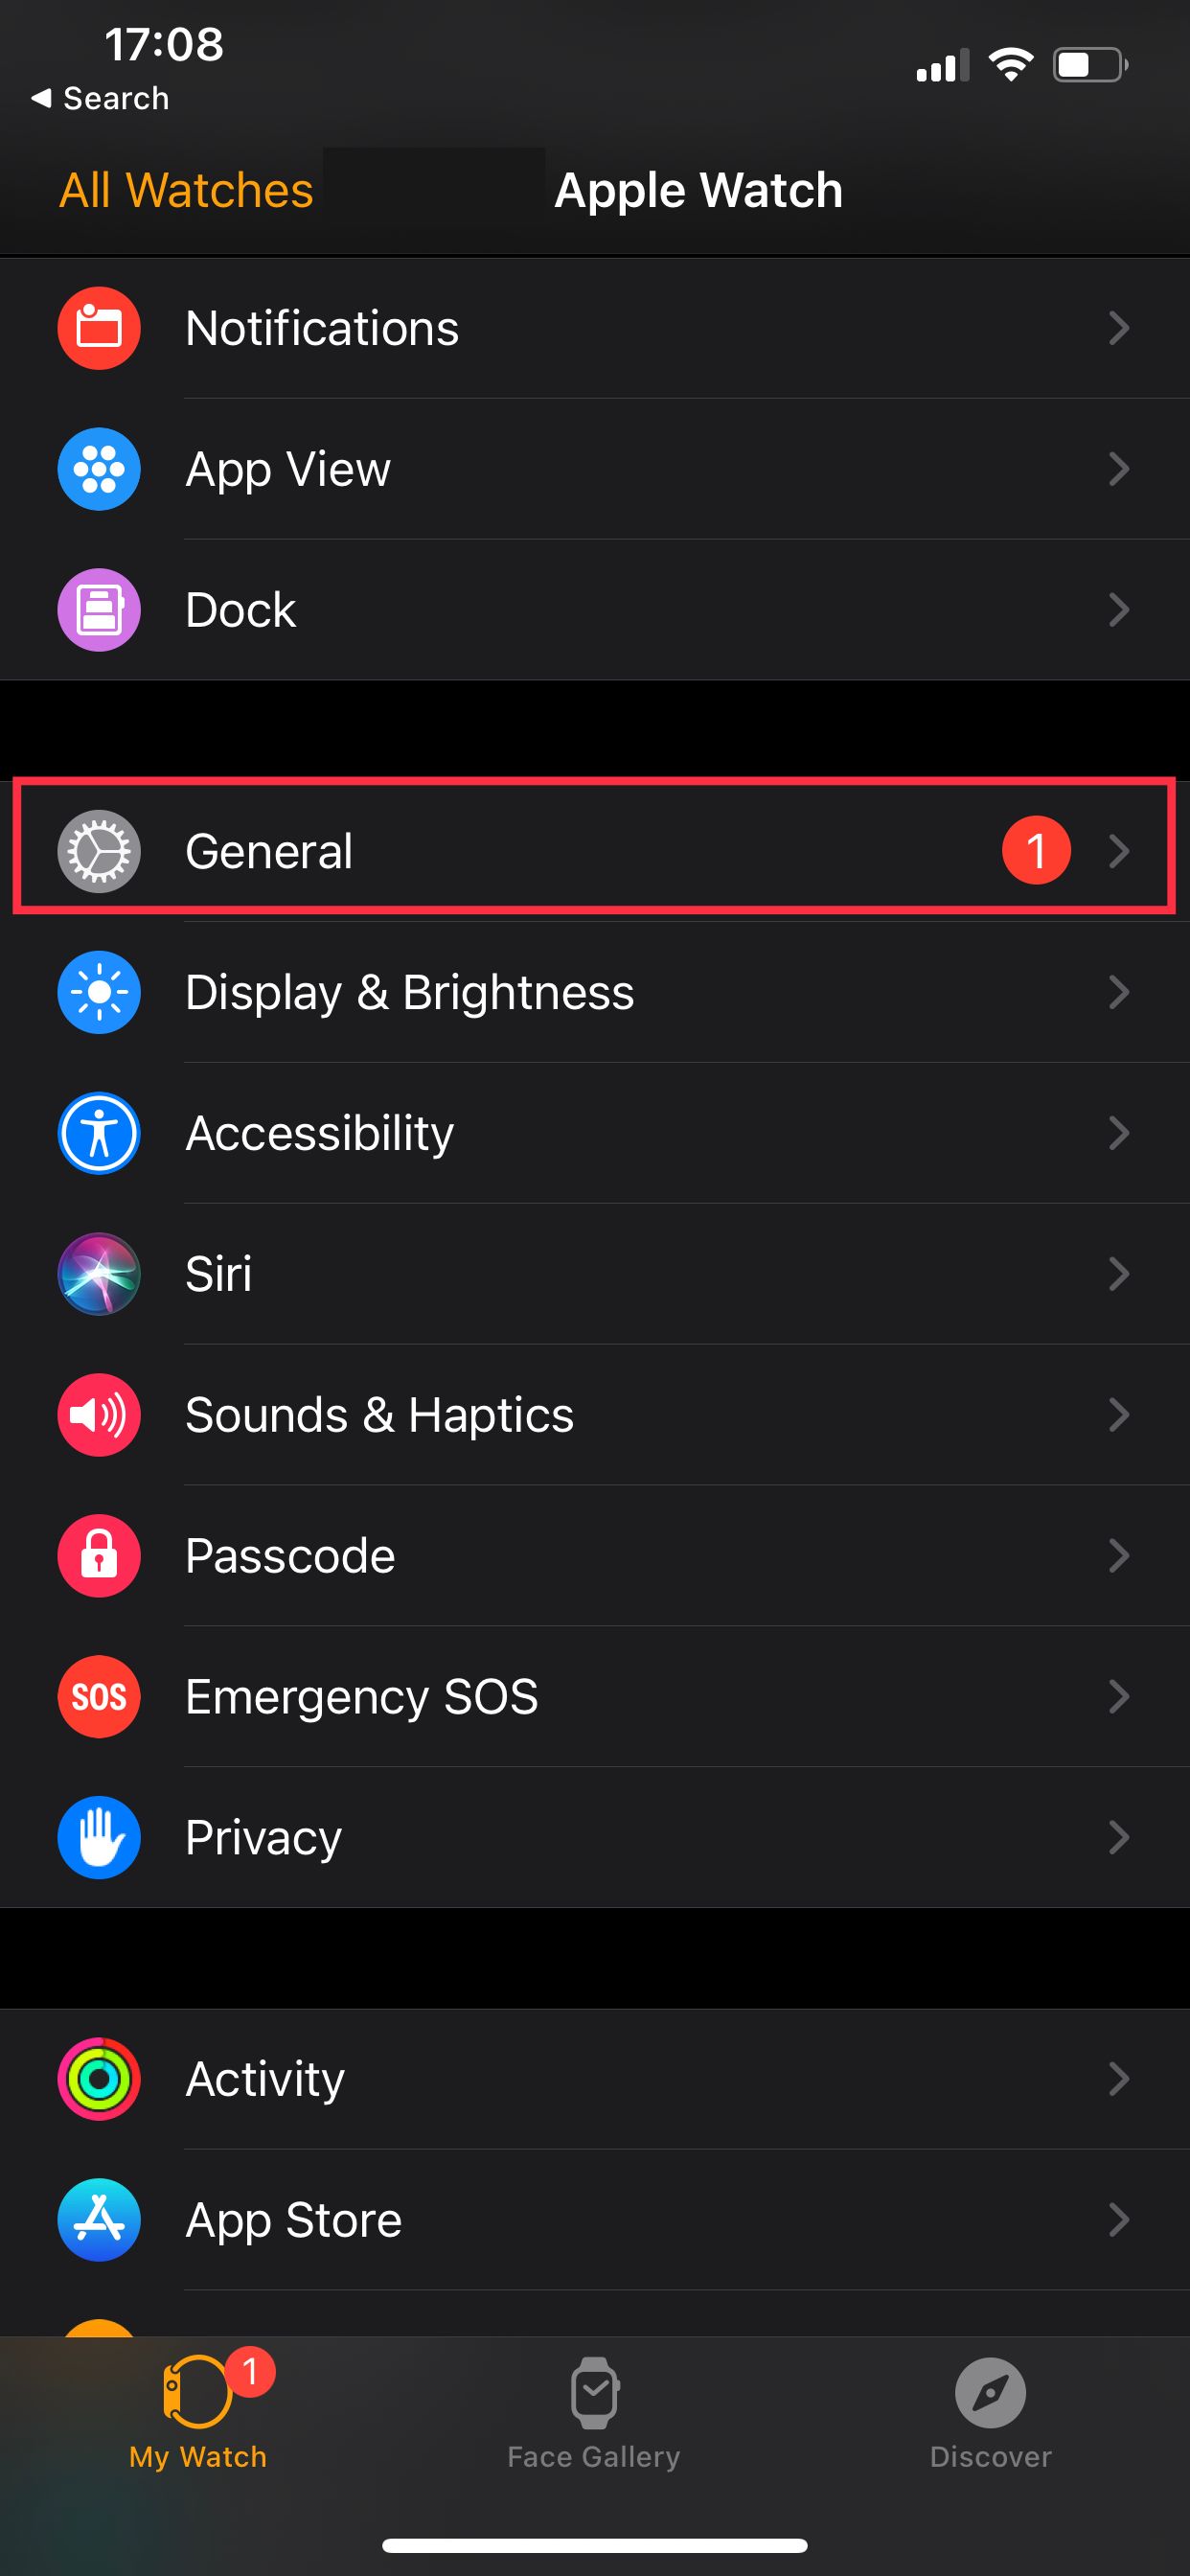 The settings page on the Watch app on iPhone